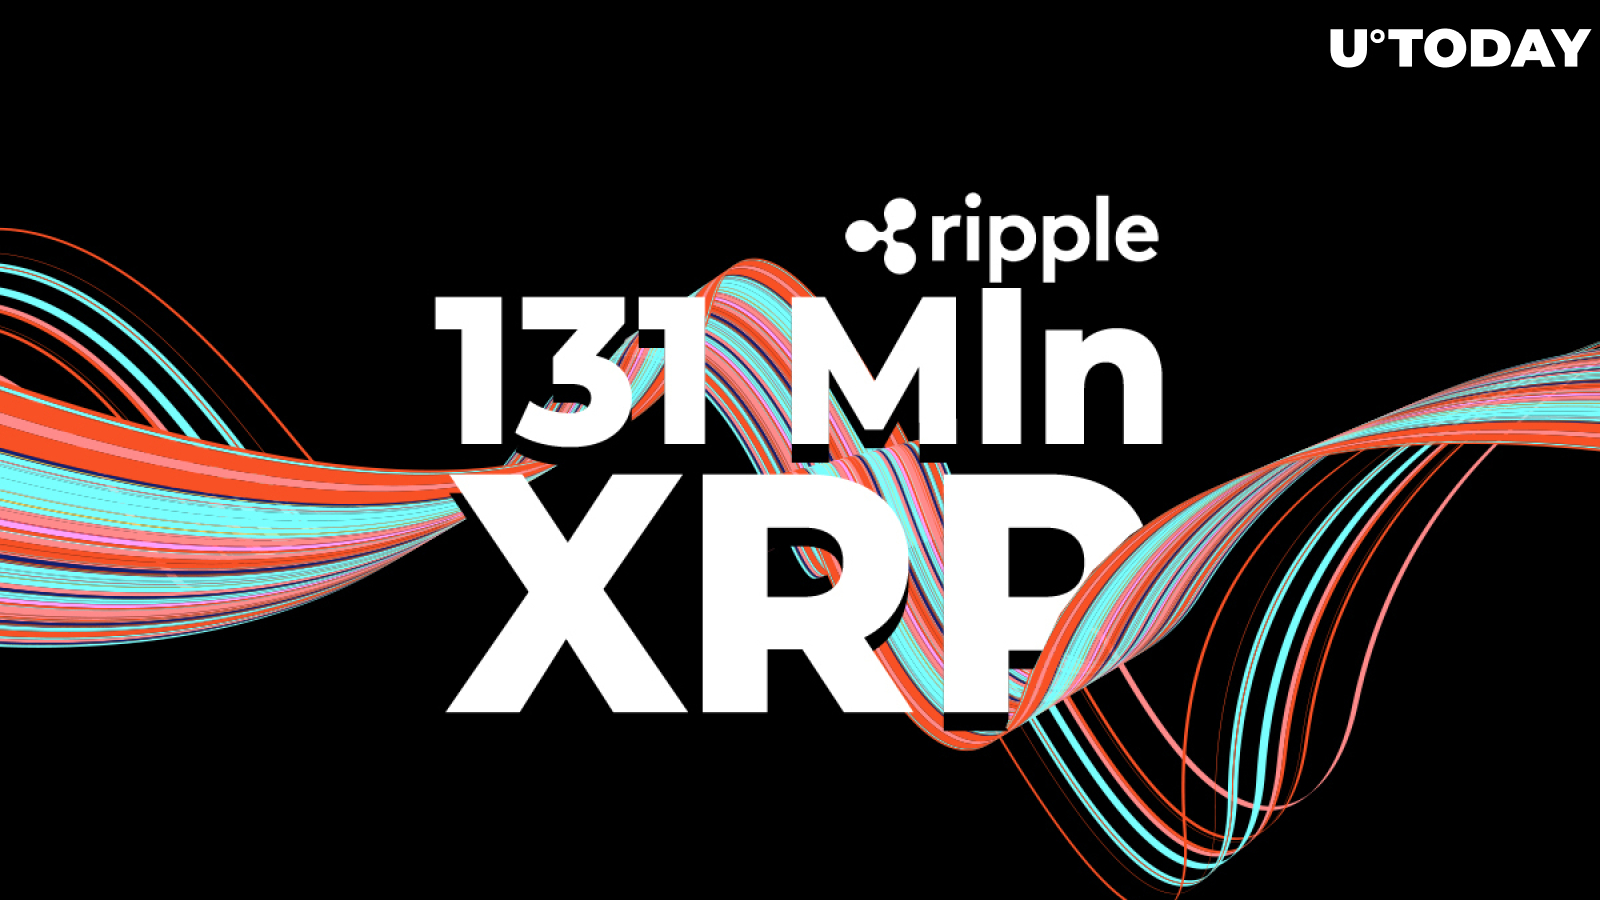 Ripple Shifts 131 Mln XRP Over Past 12 Hours as XRP Hits $0.30